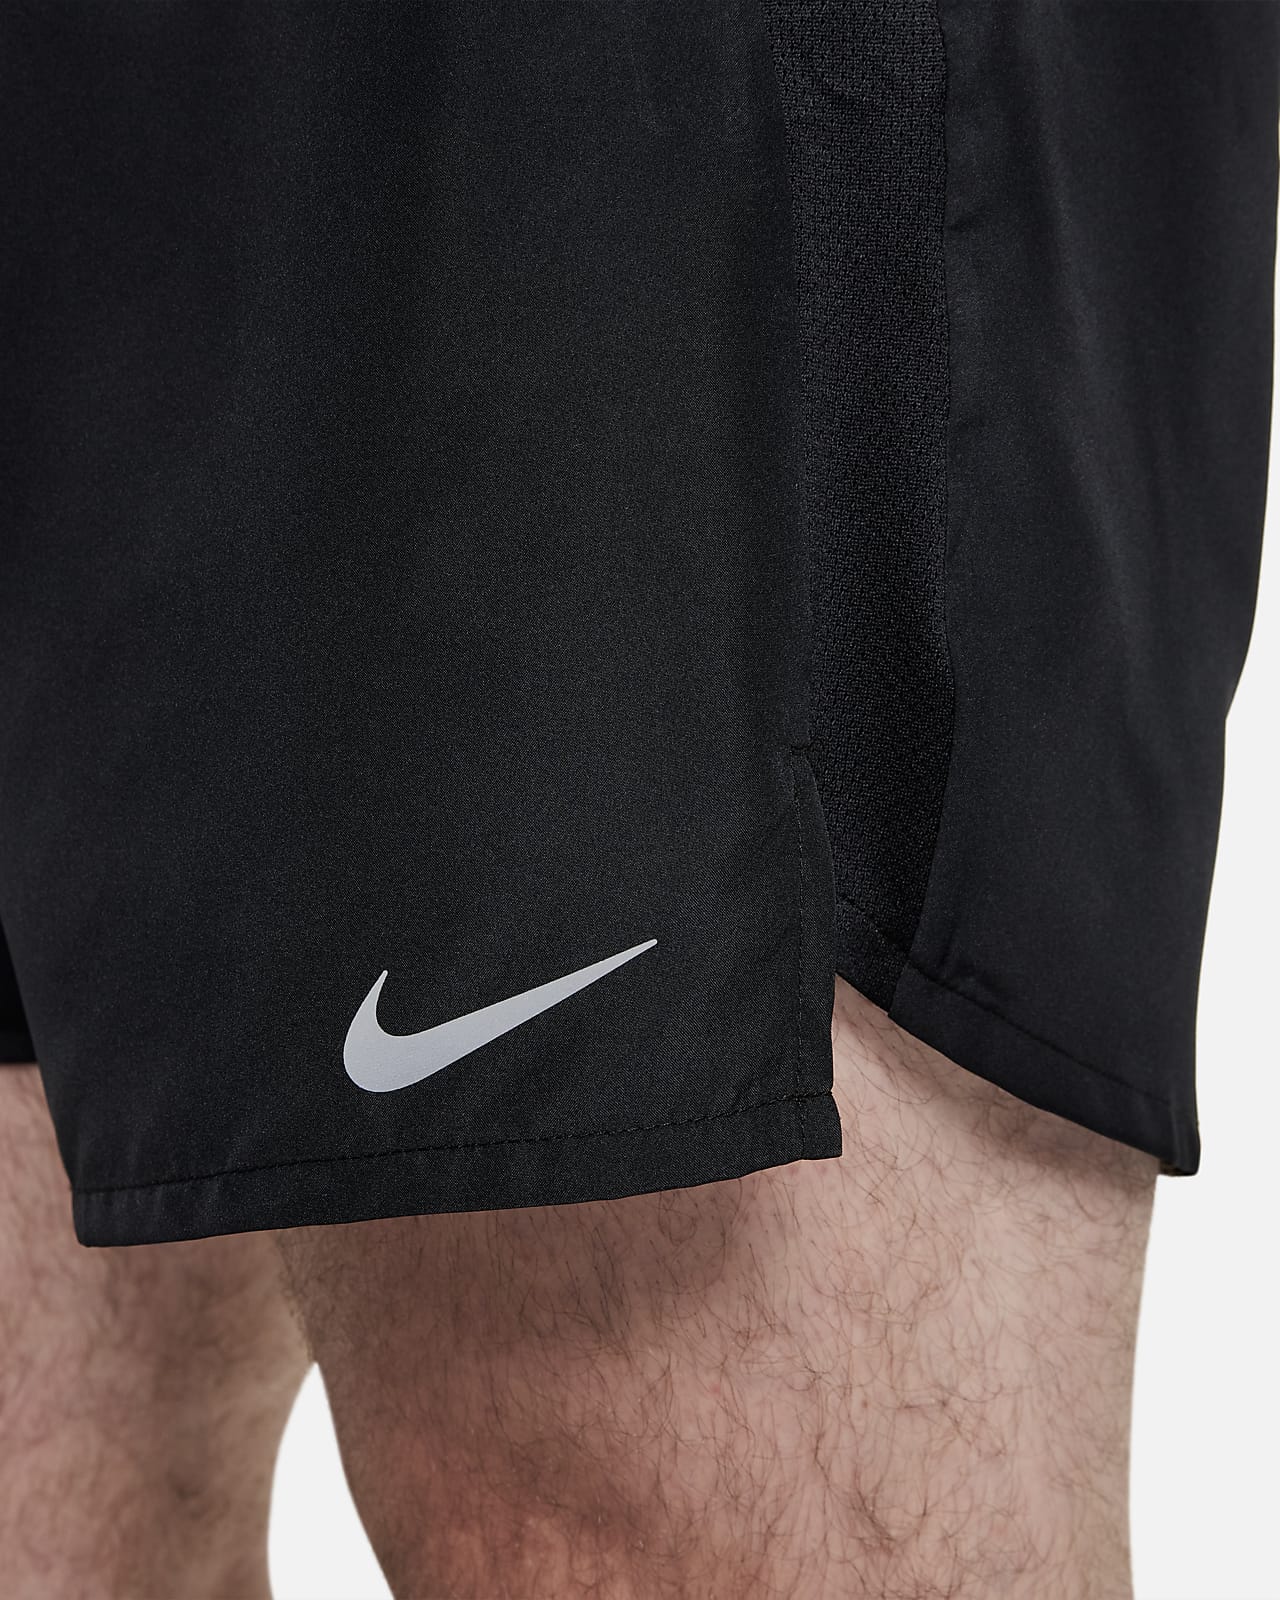 SHORTS NIKE DRI-FIT CHALLENGER 5 BRIEF-LINED VERSATILE SHORTS MASCULIN